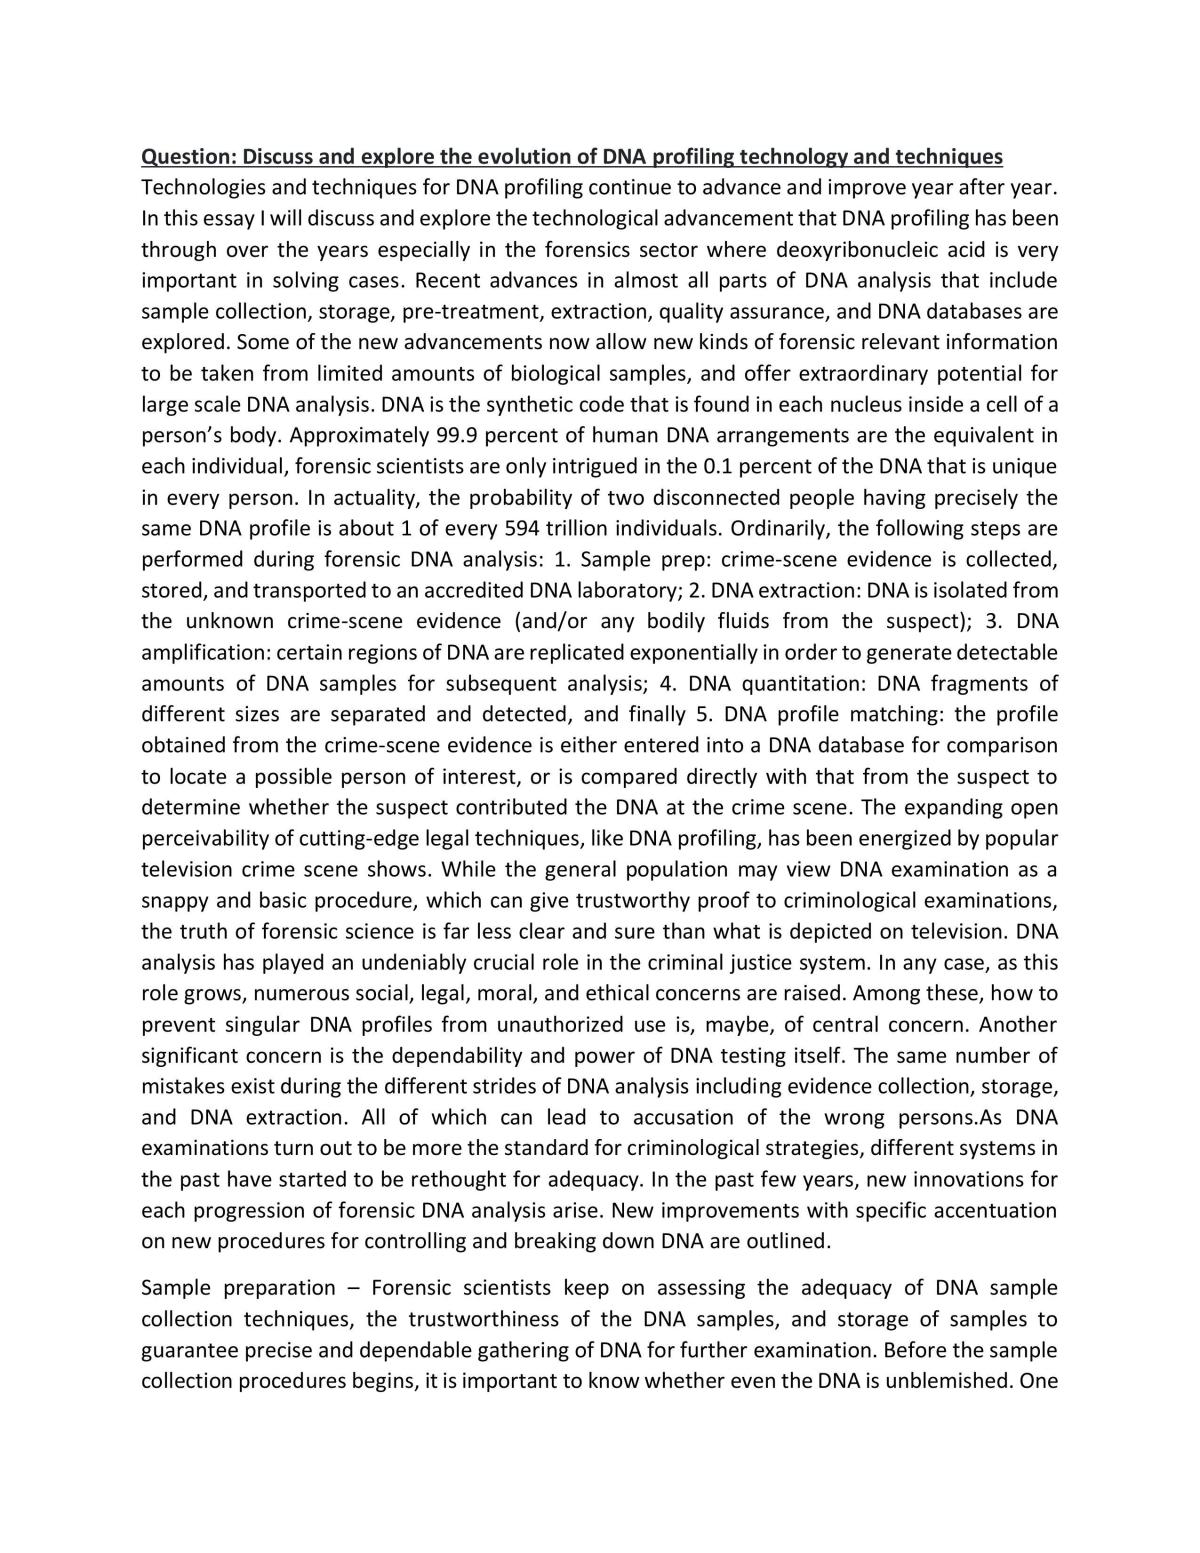 Essay discussing the advances in DNA profiling over the years - Page 1